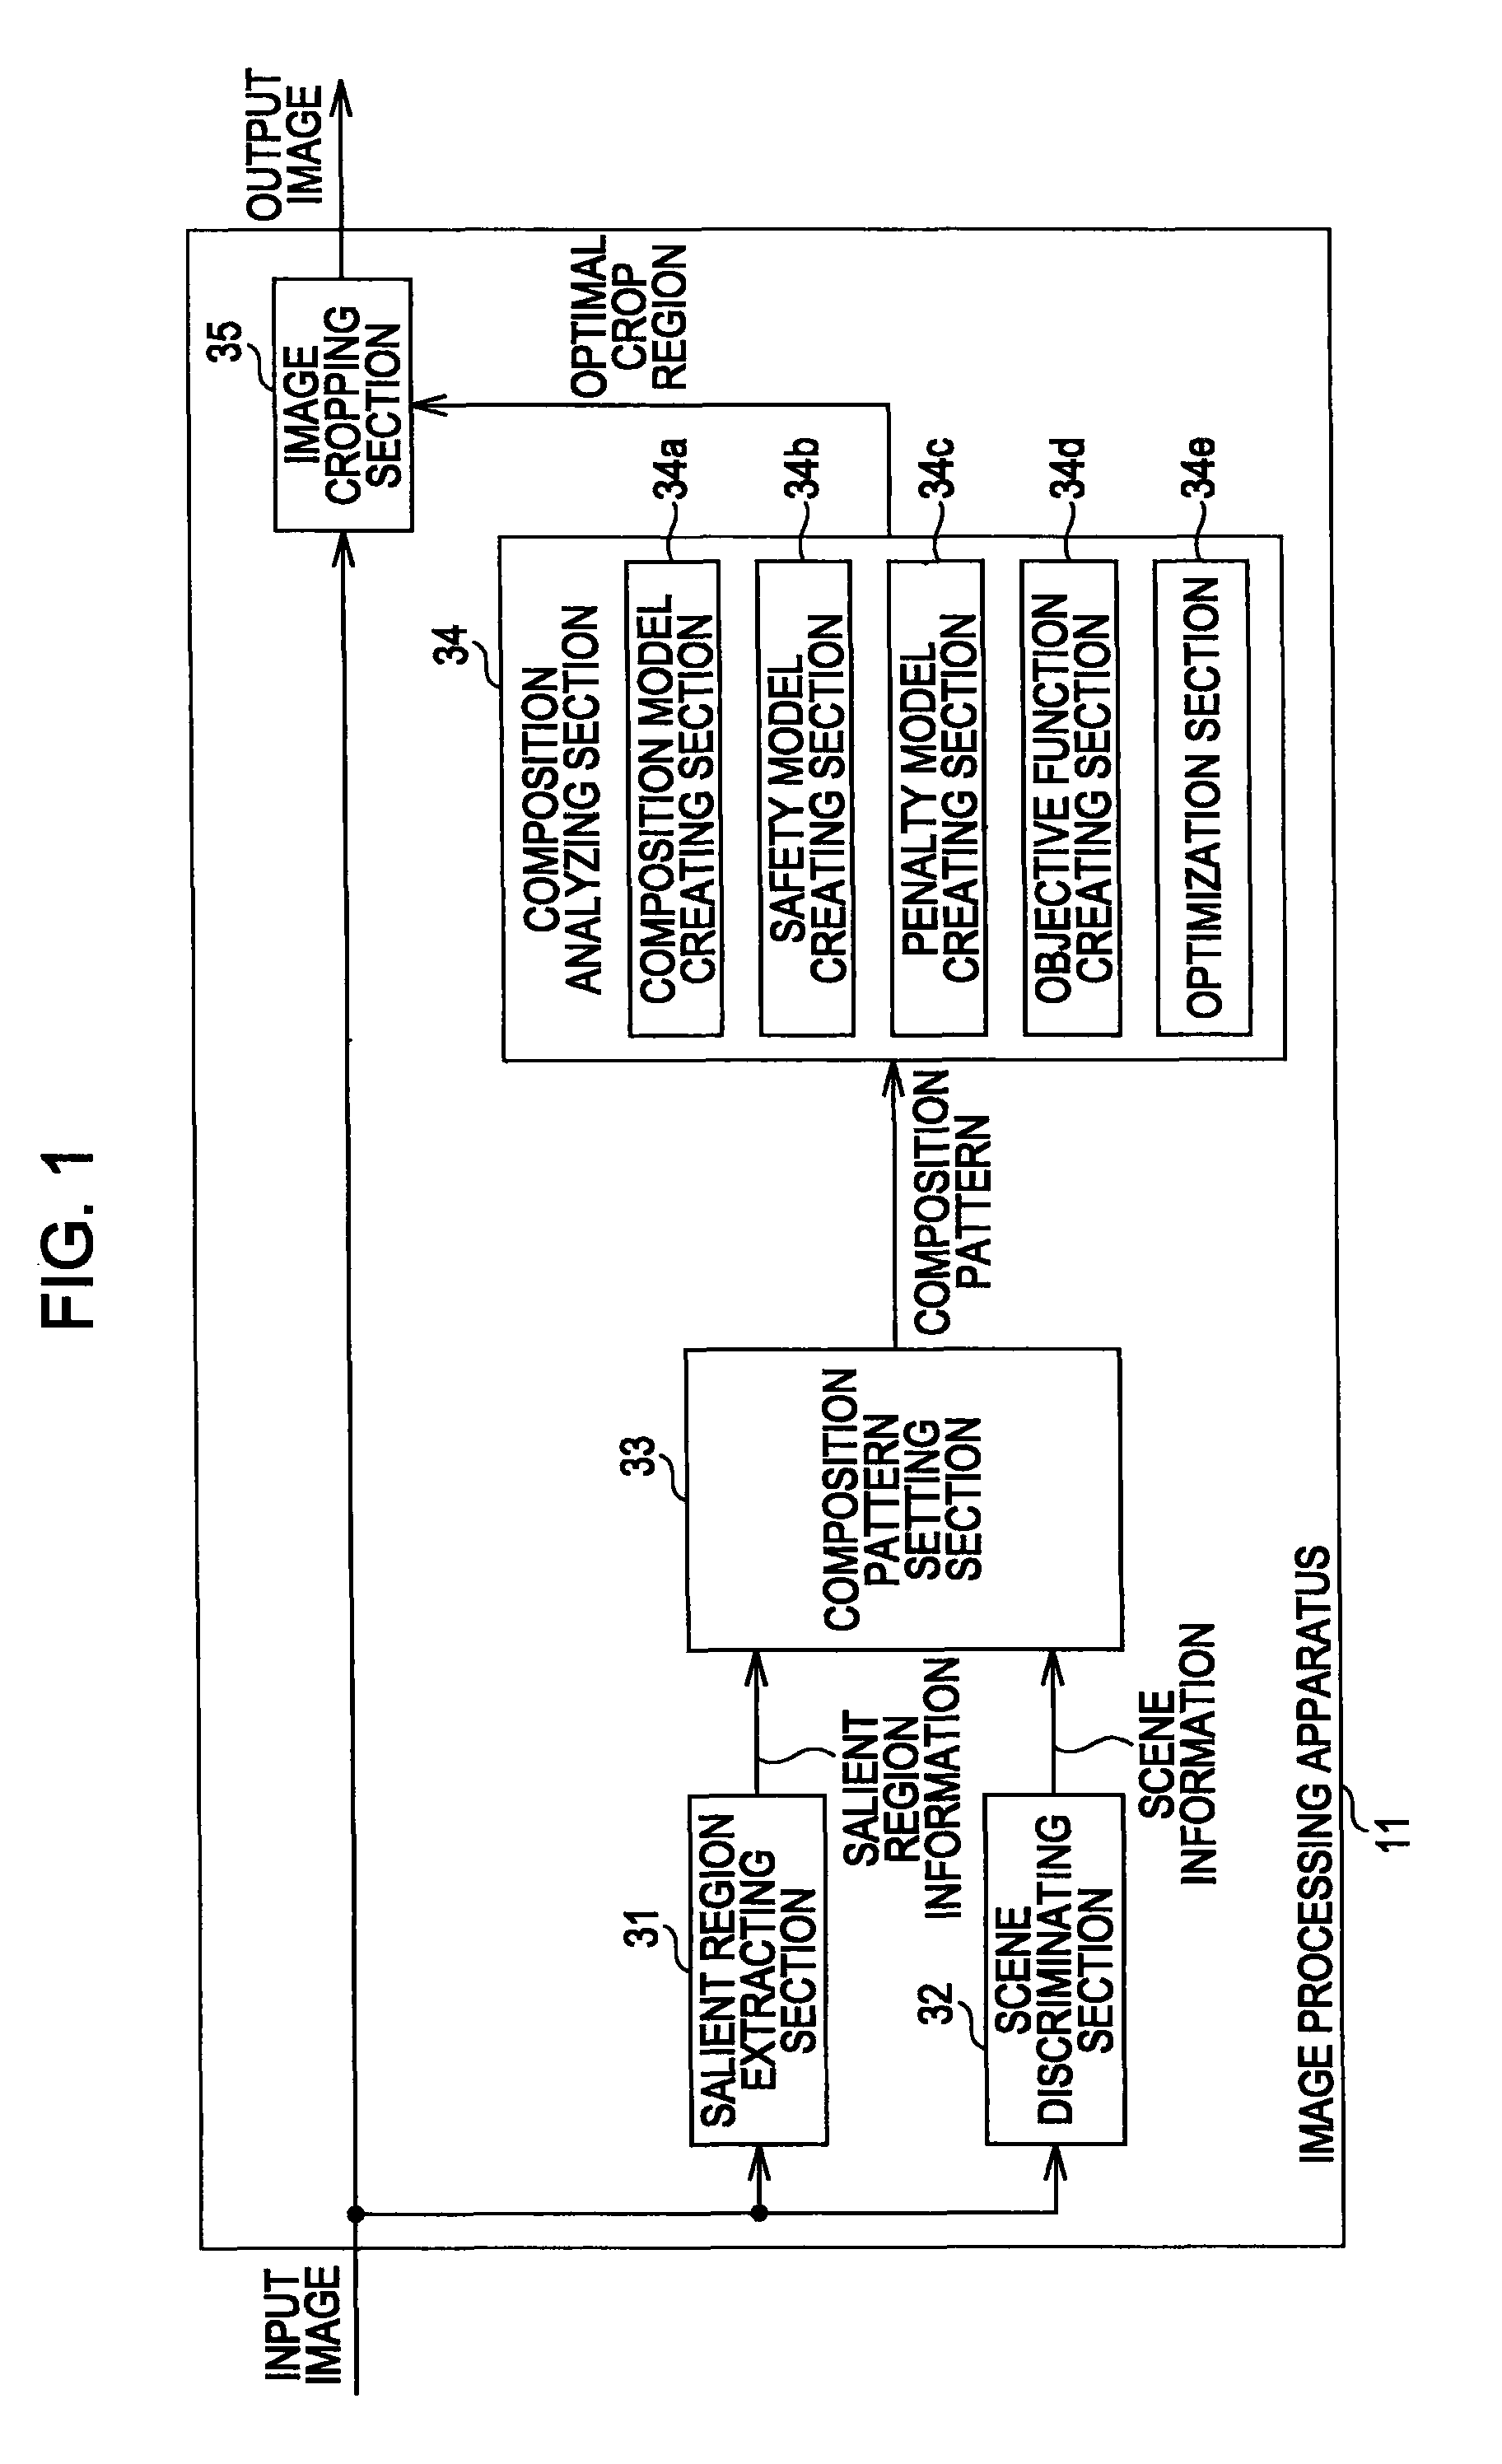 Image processing apparatus and method, image capturing apparatus, and program